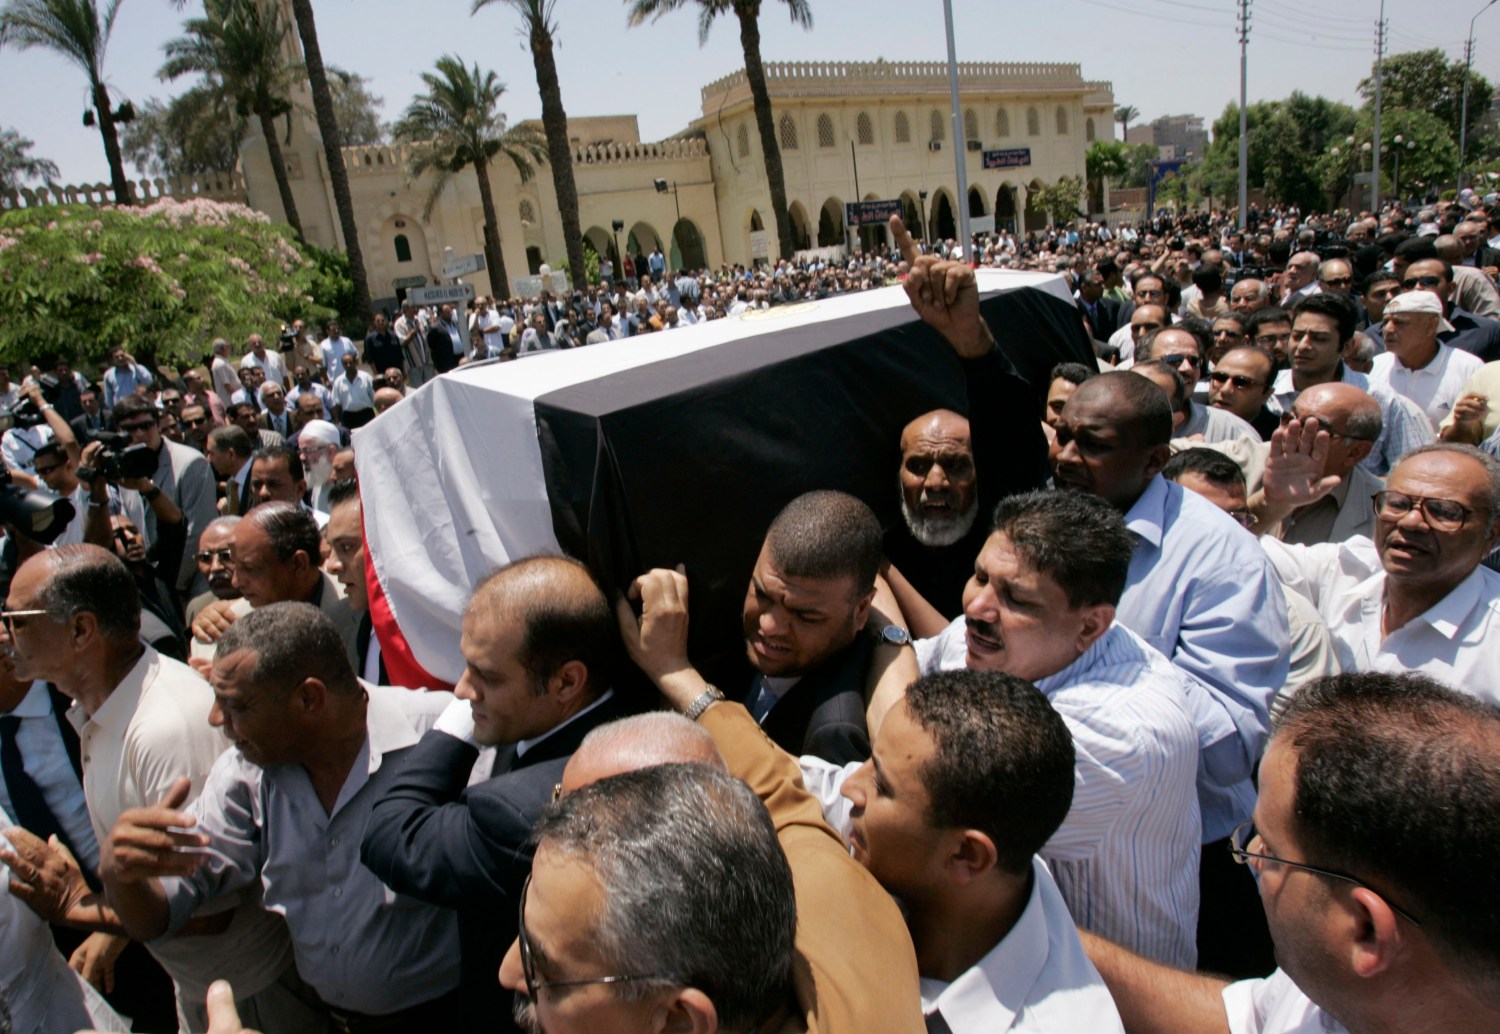 Mourners carry the coffin of Ashraf Marwan, the son-in-law of former Egyptian President Gamal Abdel Nasser, during his state funeral in Cairo July 1, 2007. Marwan, named by Israeli officials as a source for Mossad, "lost his balance" before a fatal fall from his London balcony, Egyptian state media said on Thursday. REUTERS/Nasser Nuri (EGYPT) - RTR1RCDG